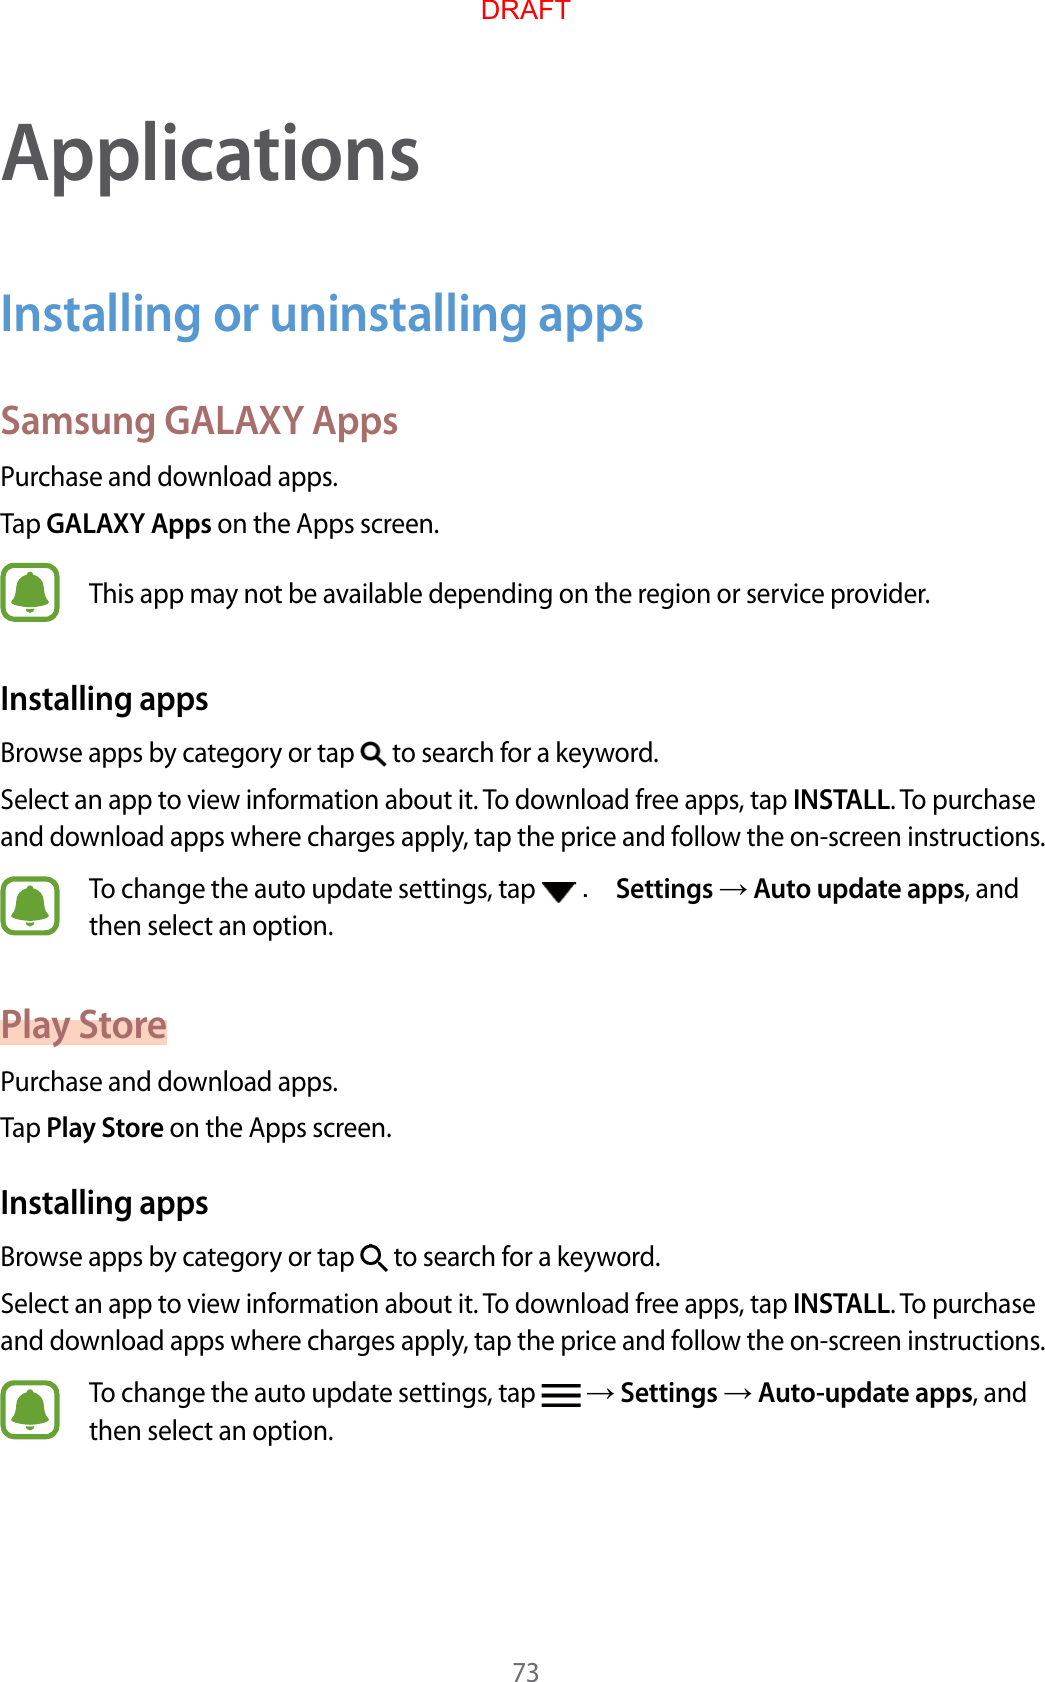 73ApplicationsInstalling or uninstalling appsSamsung GALAXY AppsPur chase and do wnload apps .Tap GALAXY Apps on the Apps screen.This app may not be a vailable depending on the r eg ion or service provider.Installing appsBrow se apps b y cat egory or tap   to search for a keywor d .Select an app to view inf ormation about it. To download free apps, tap INSTALL. To purchase and download apps where char ges apply, tap the price and f ollo w the on-scr een instructions.To change the auto update settings , tap   . Settings  Aut o updat e apps, and then select an option.Pla y St orePur chase and do wnload apps .Tap Play St or e on the Apps screen.Installing appsBrow se apps b y cat egory or tap   to search for a keywor d .Select an app to view inf ormation about it. To download free apps, tap INSTALL. To purchase and download apps where char ges apply, tap the price and f ollo w the on-scr een instructions.To change the auto update settings , tap    Settings  Aut o-update apps, and then select an option.DRAFT